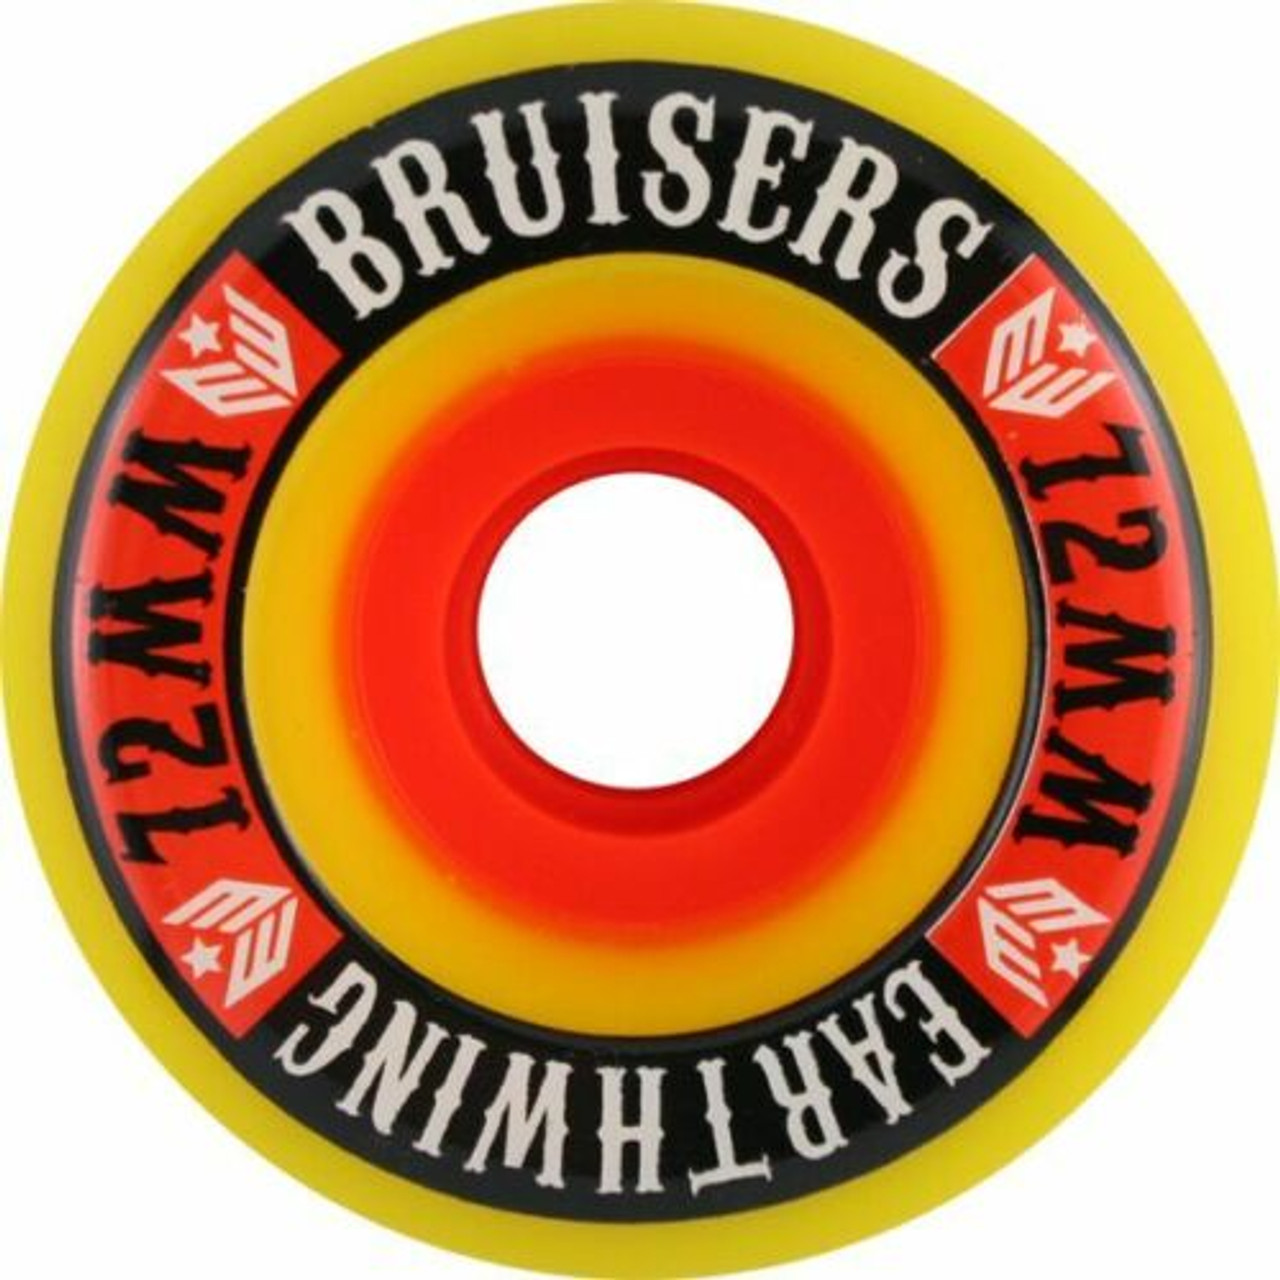 Earthwing Superball Bruisers Wheels Set Yellow 72mm/87a